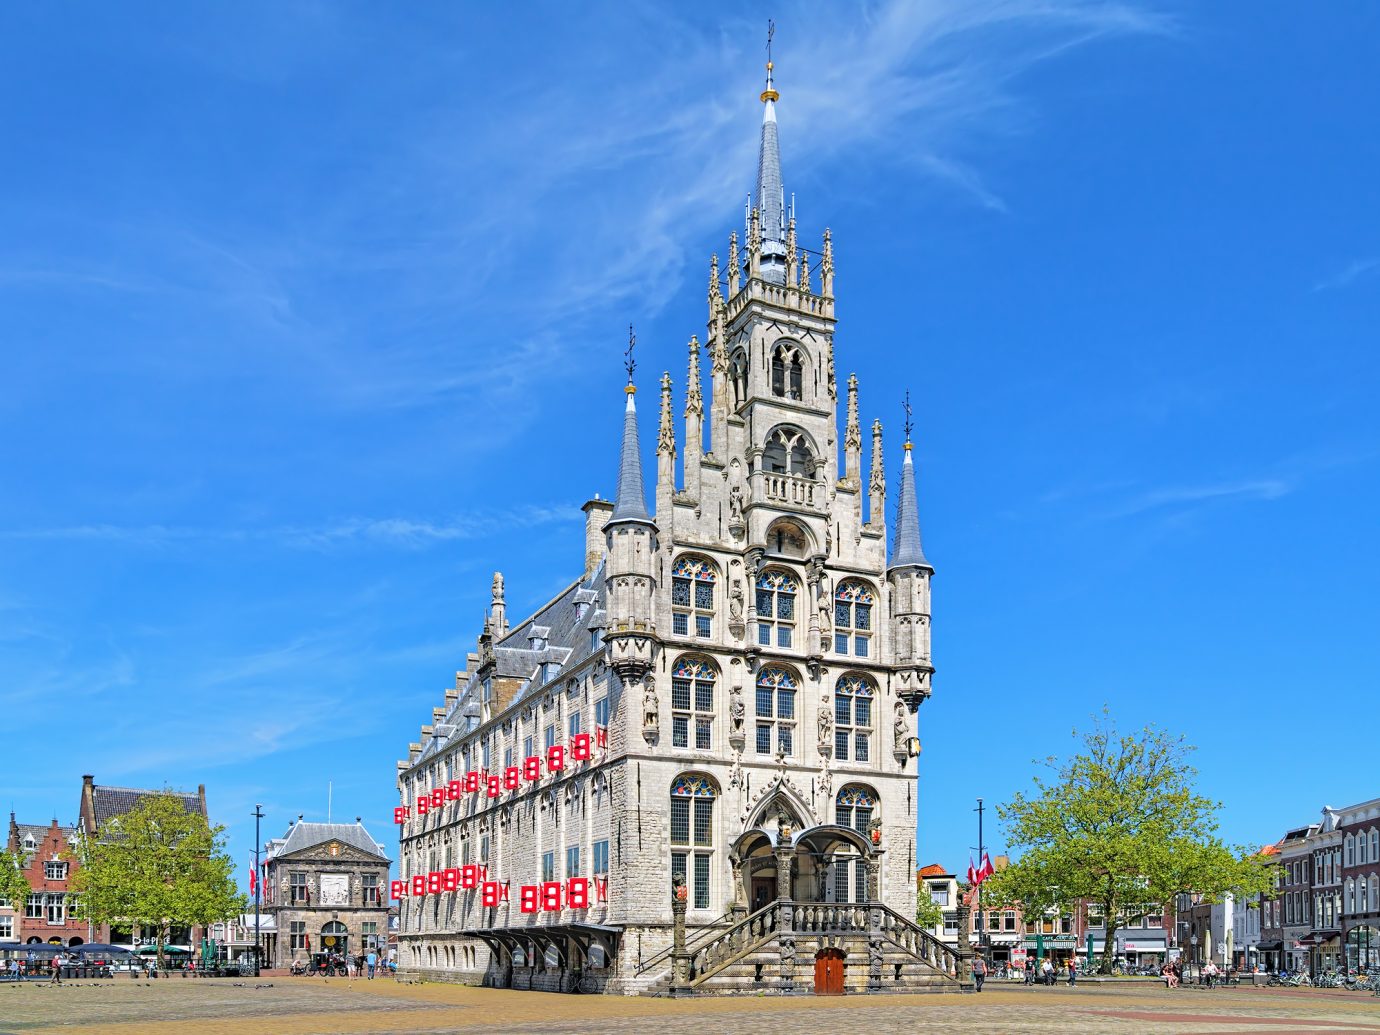 Town Hall of Gouda on the Markt square in Gouda, The Netherlands